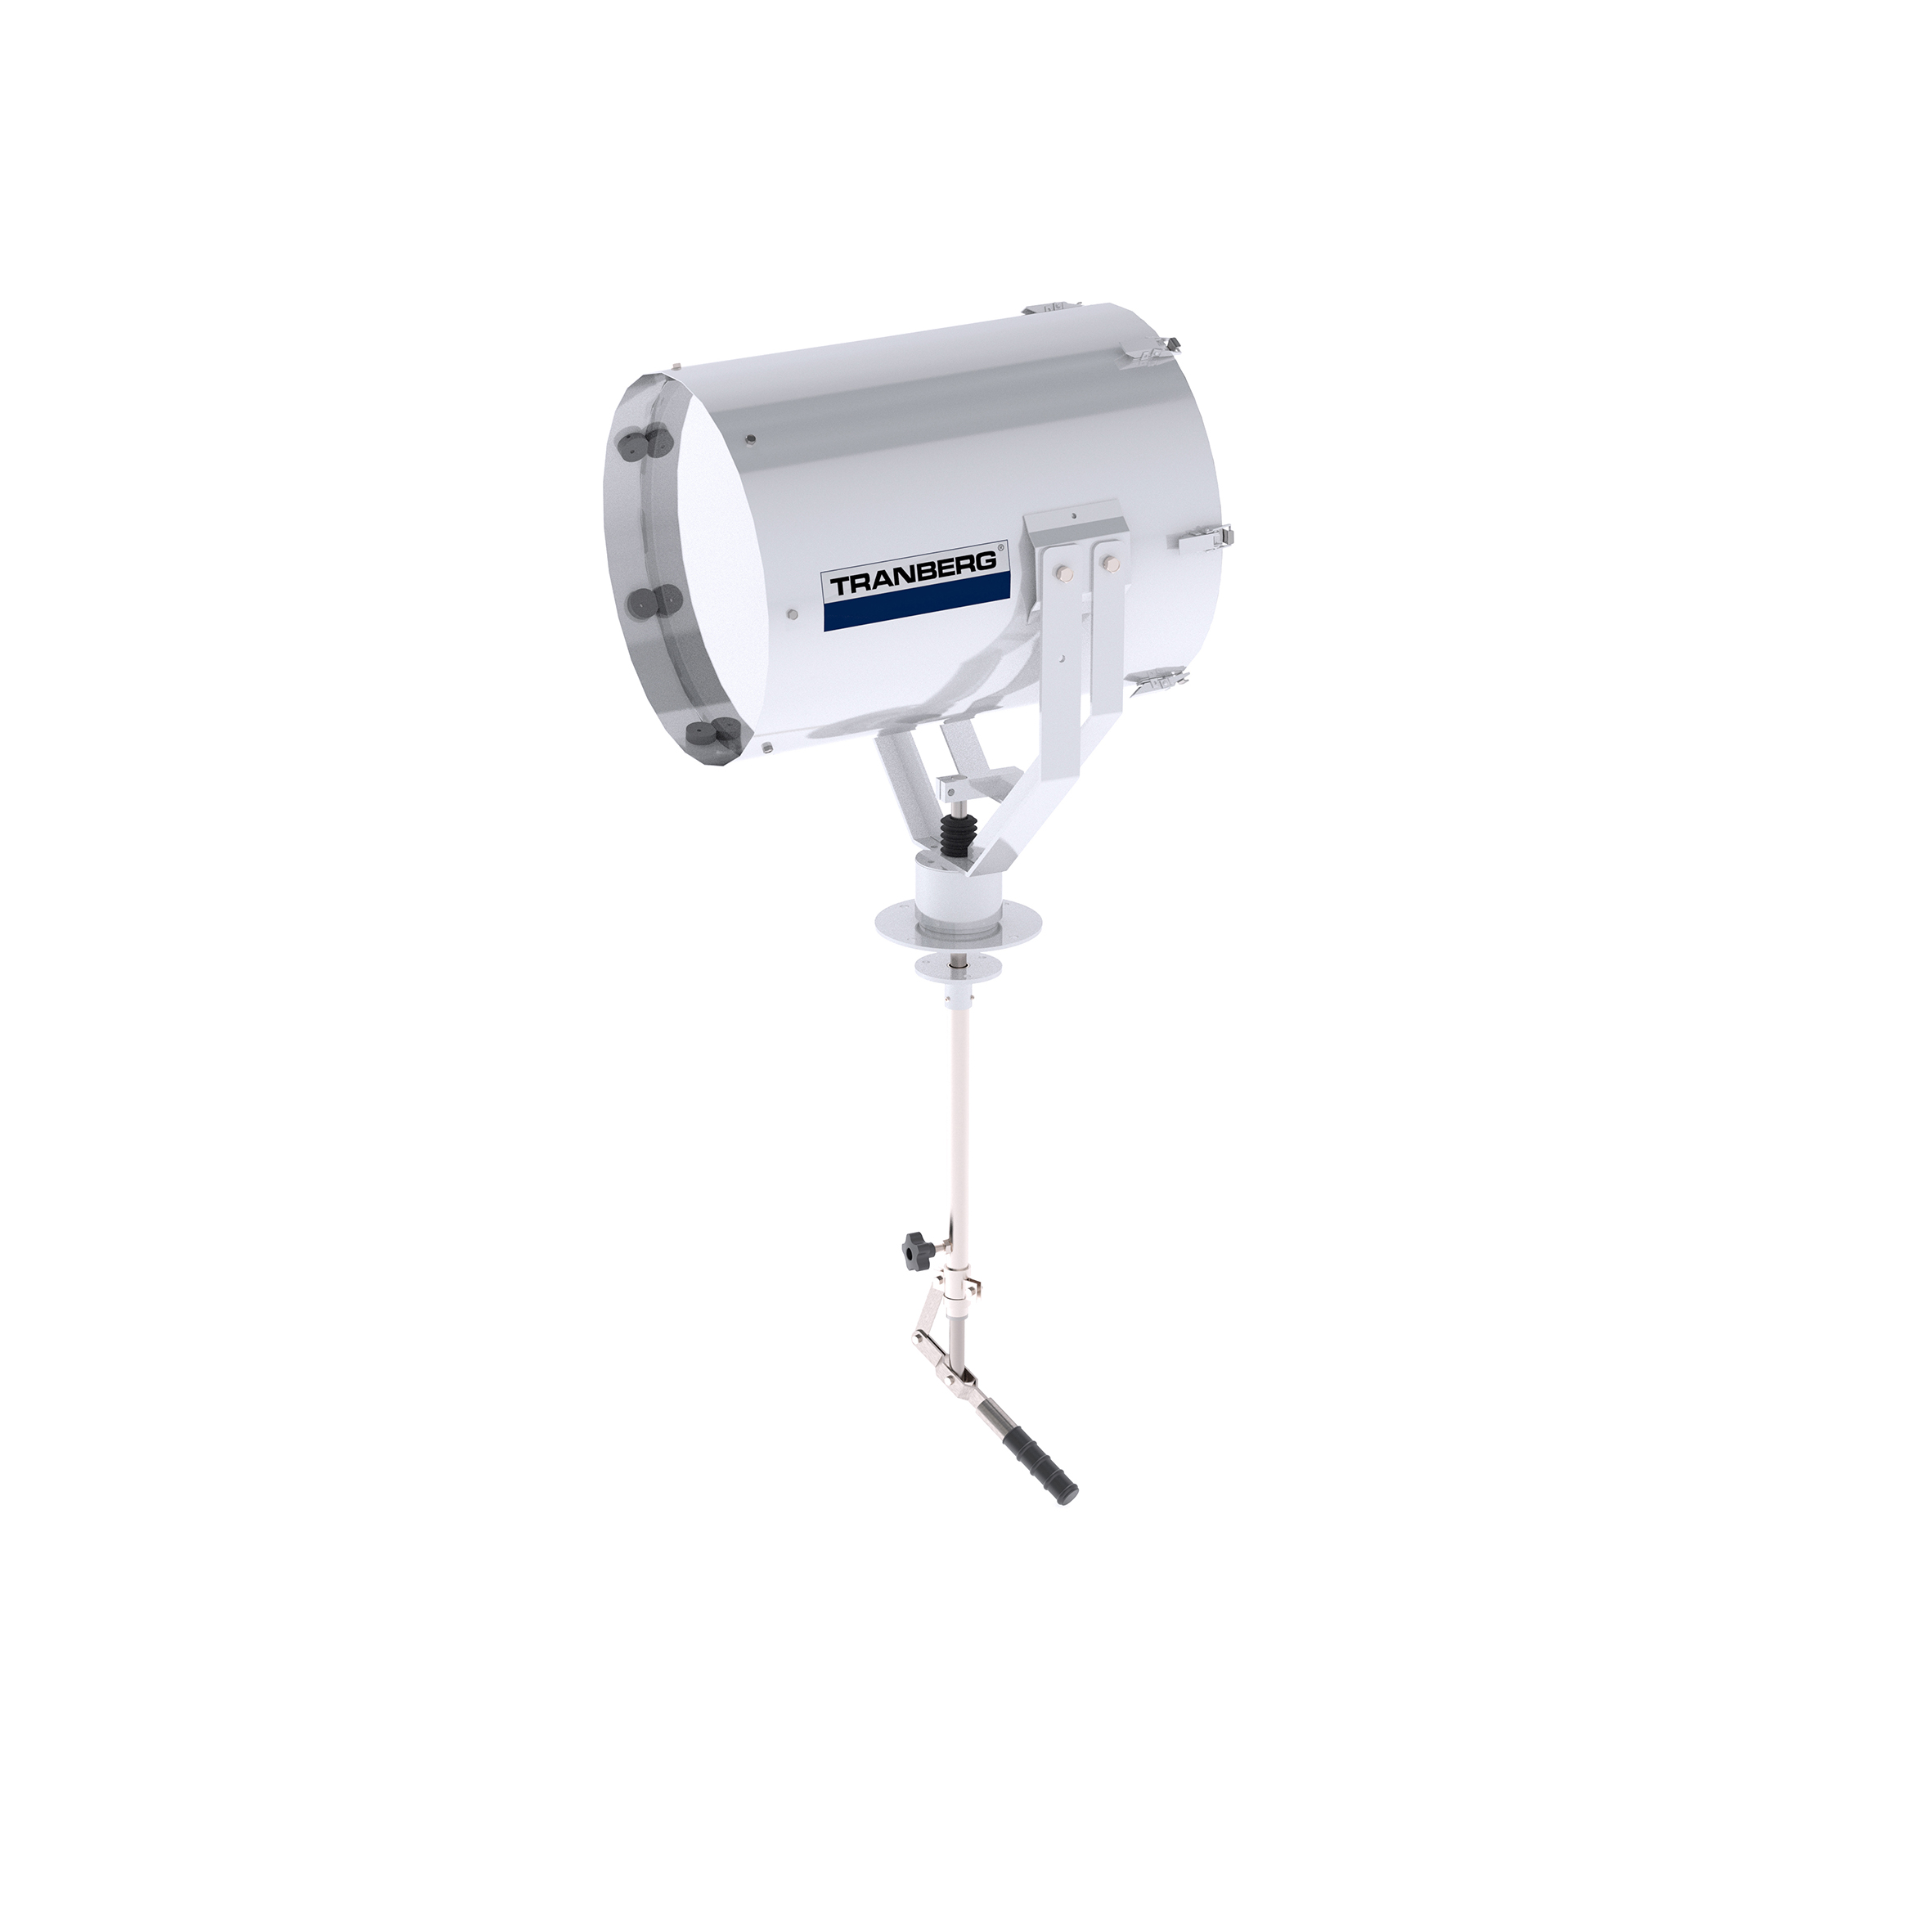 TEF 2630 Searchlight: Halogen 250W bulb incl, 24V, Bridge Controlled, Stainless Steel